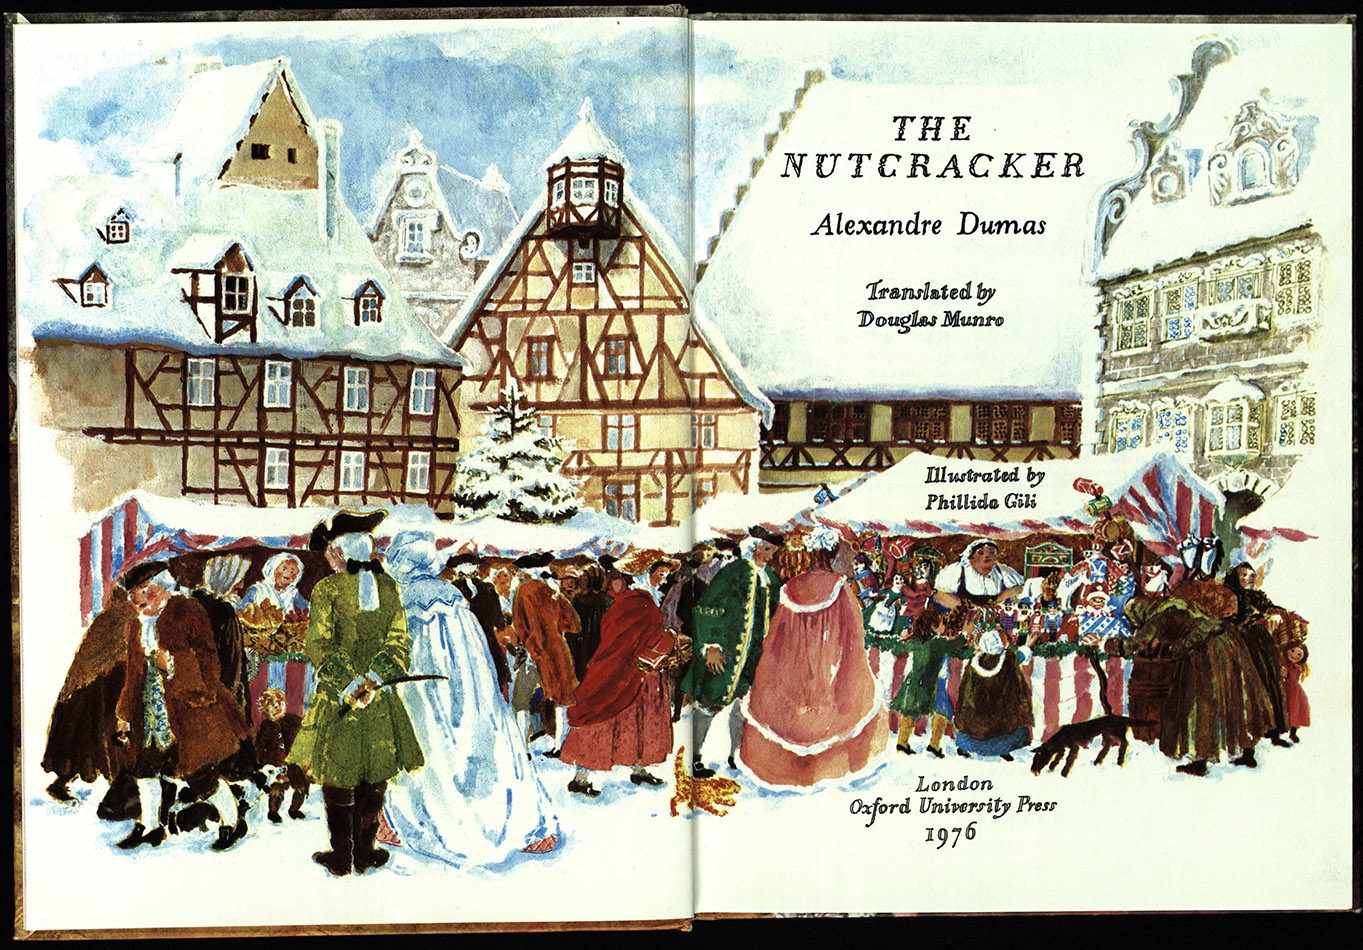 The title page of The Nutcracker, depicting a traditional Christmas market scene. Perhaps those are nutcrackers for sale on the stall with the children gathered round….